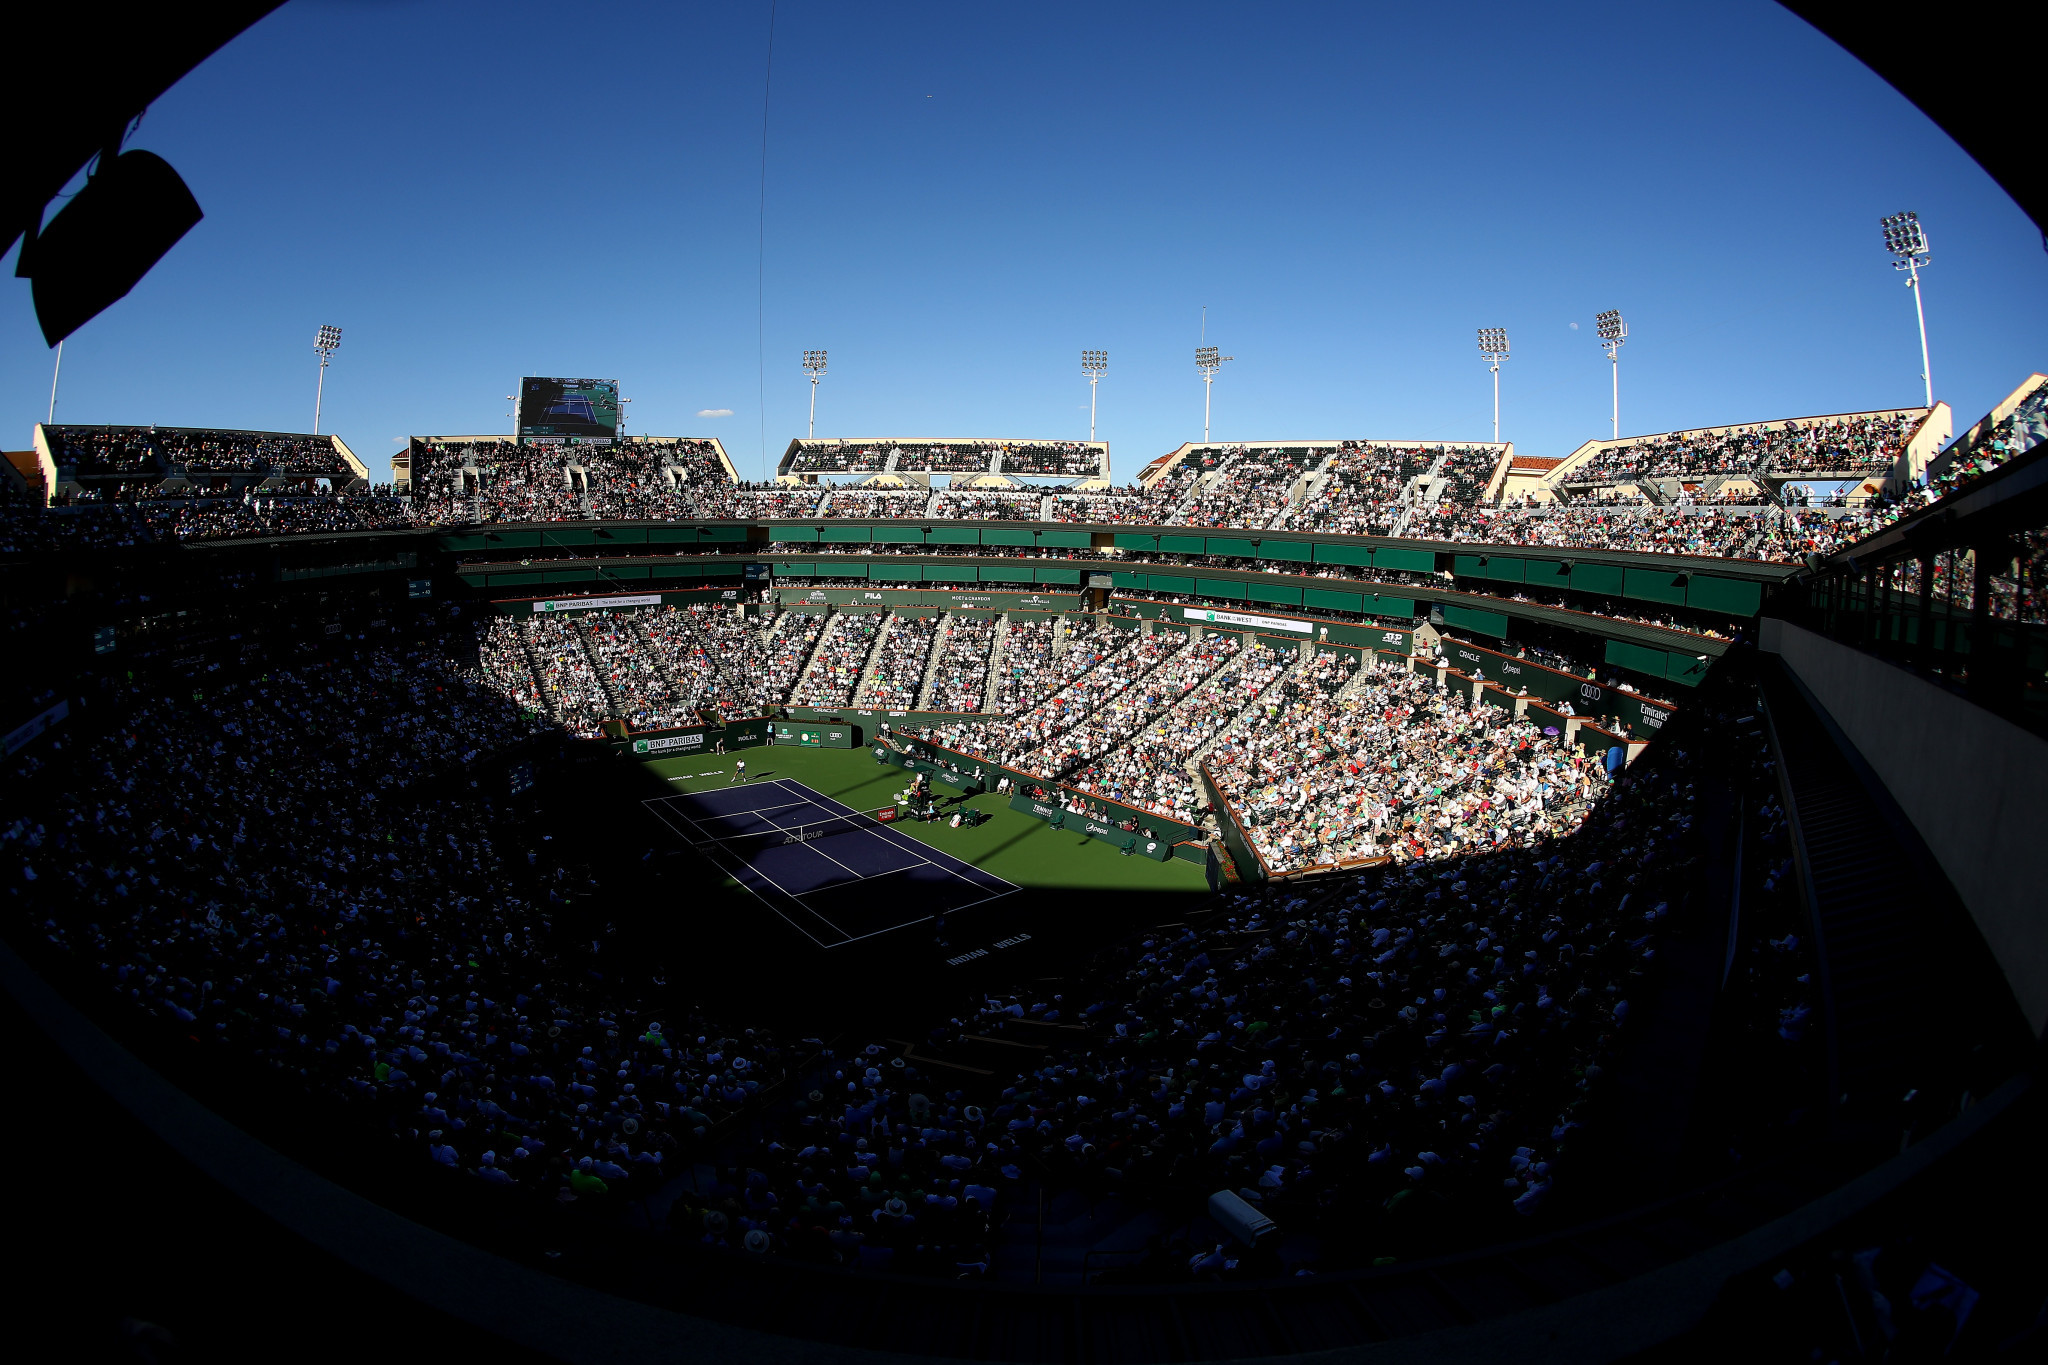 Ball kids to wear gloves, not touch towels at Indian Wells